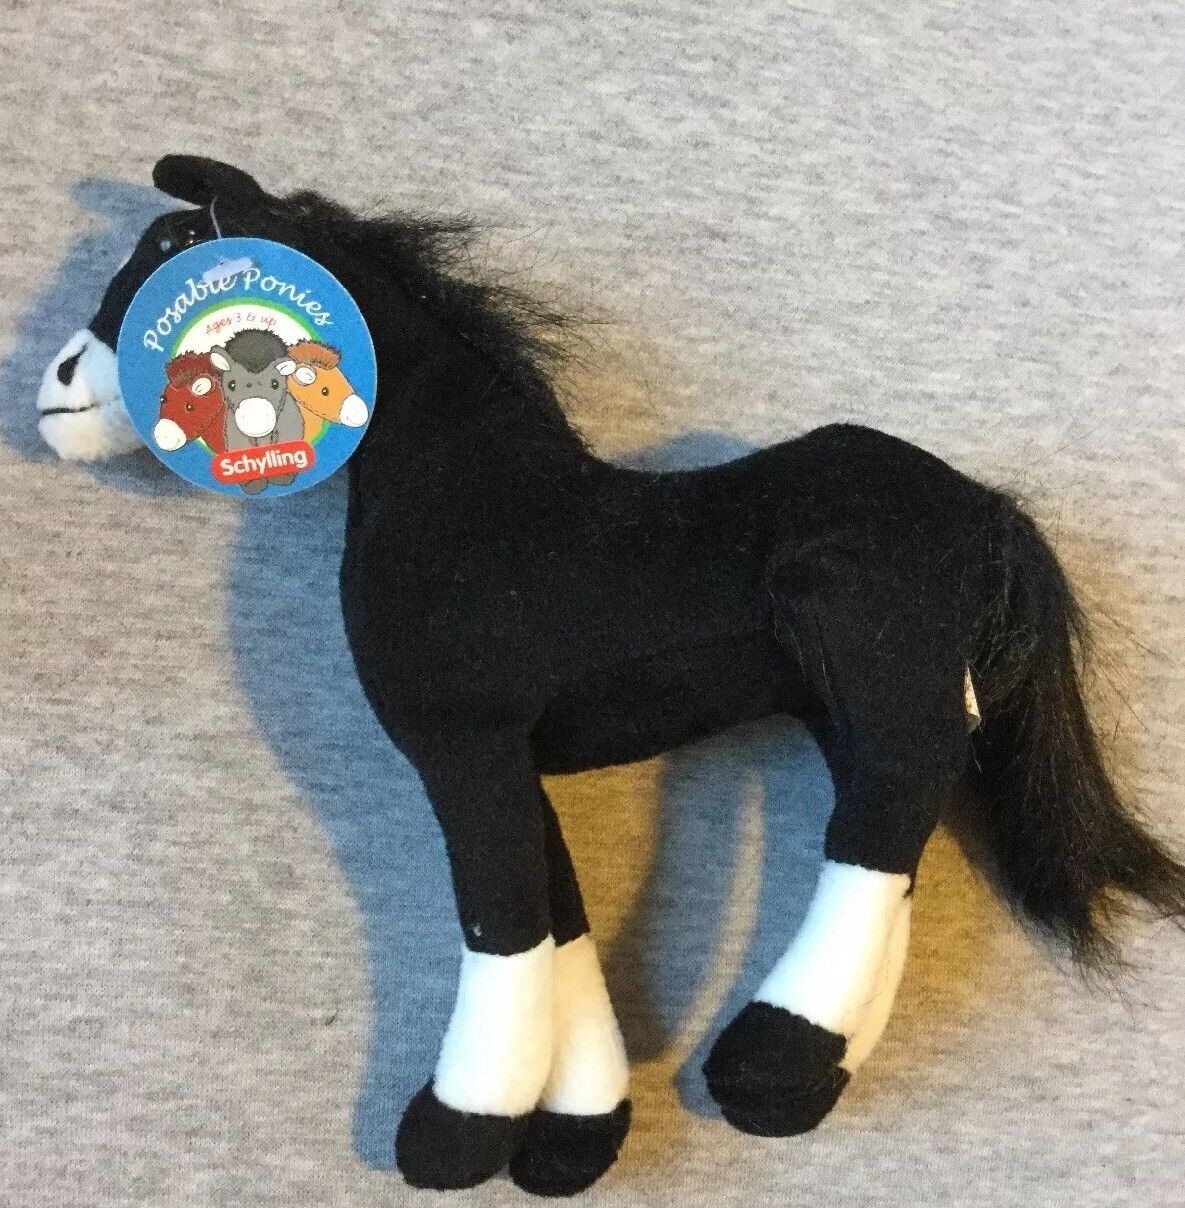 Posable Plush Pony Schylling Ponies 8 inch Arabian Horse Black White Shoes